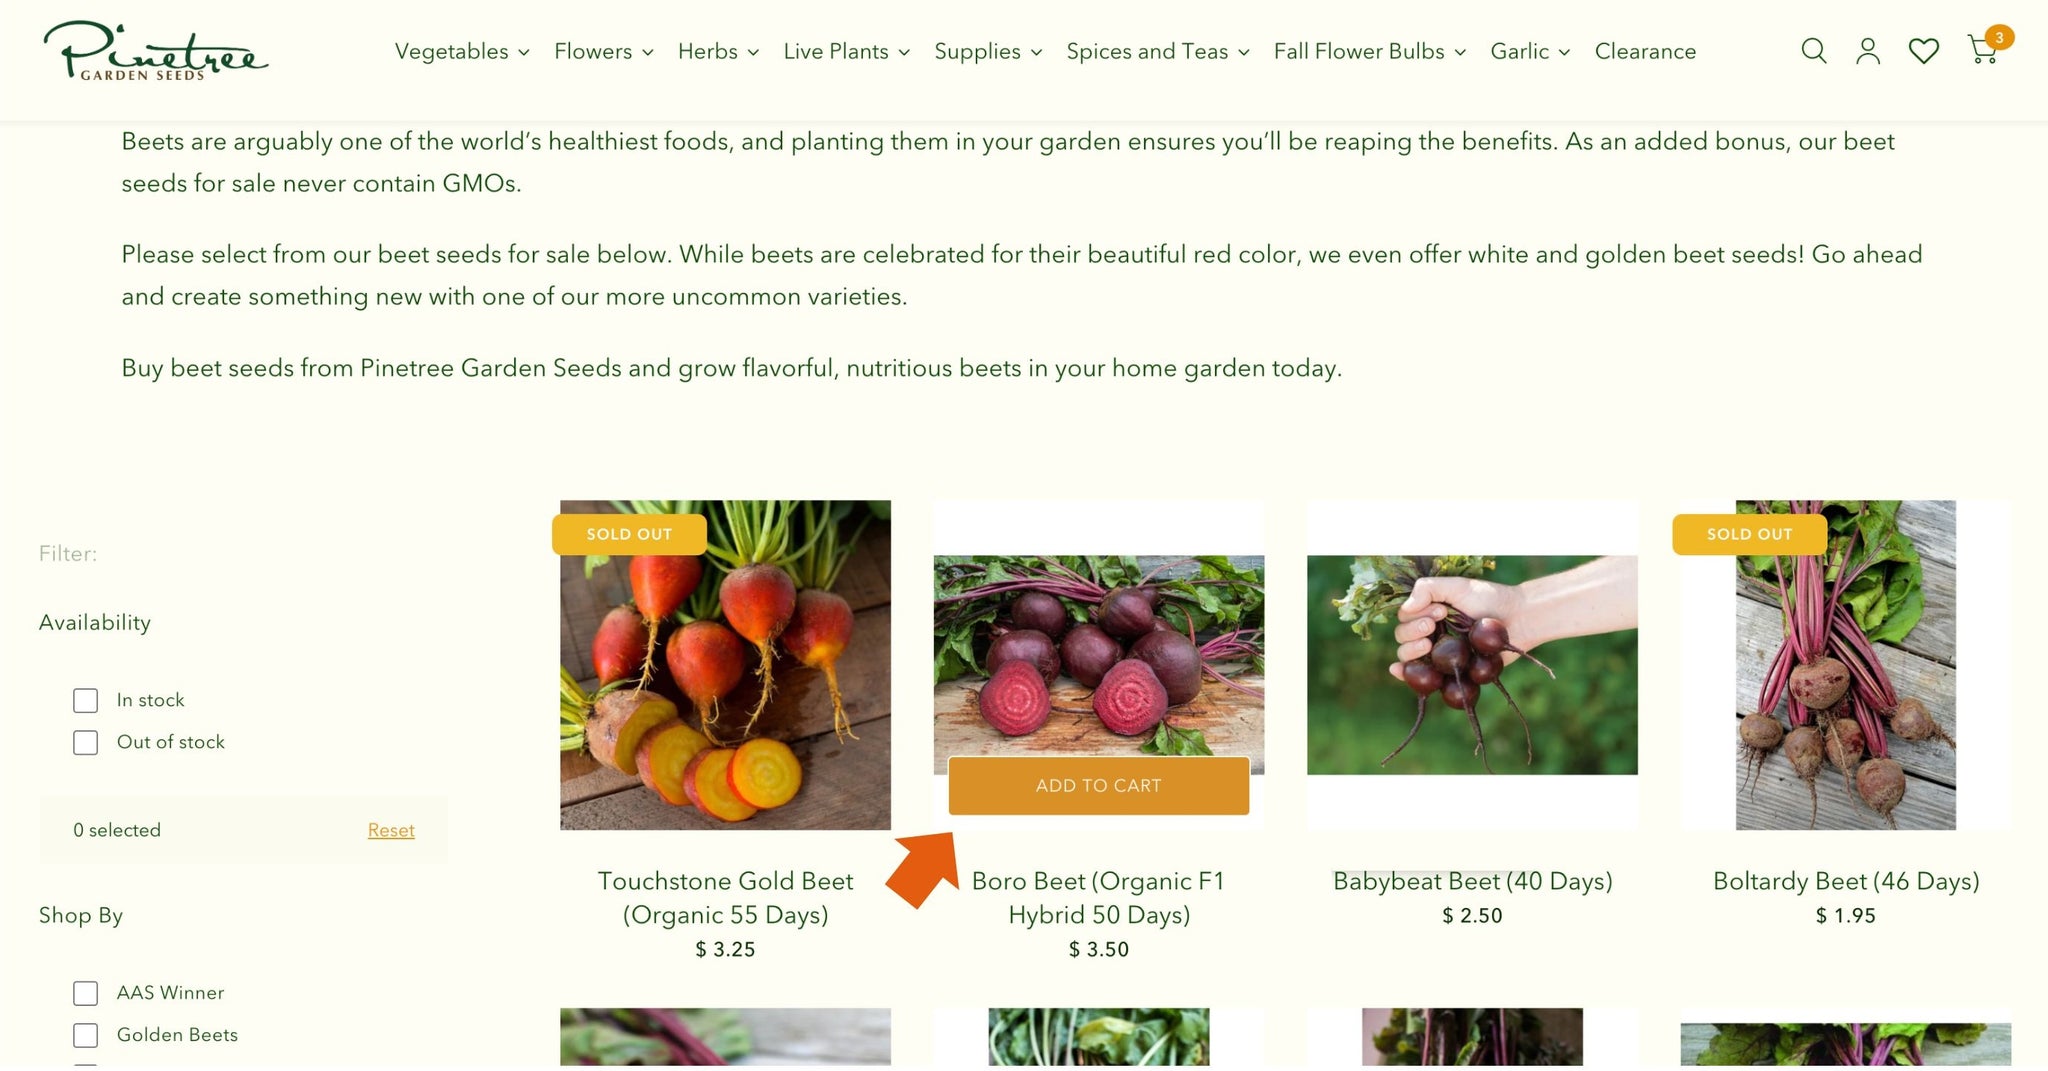 Information about Beet Seeds in green lettering on a tan page.